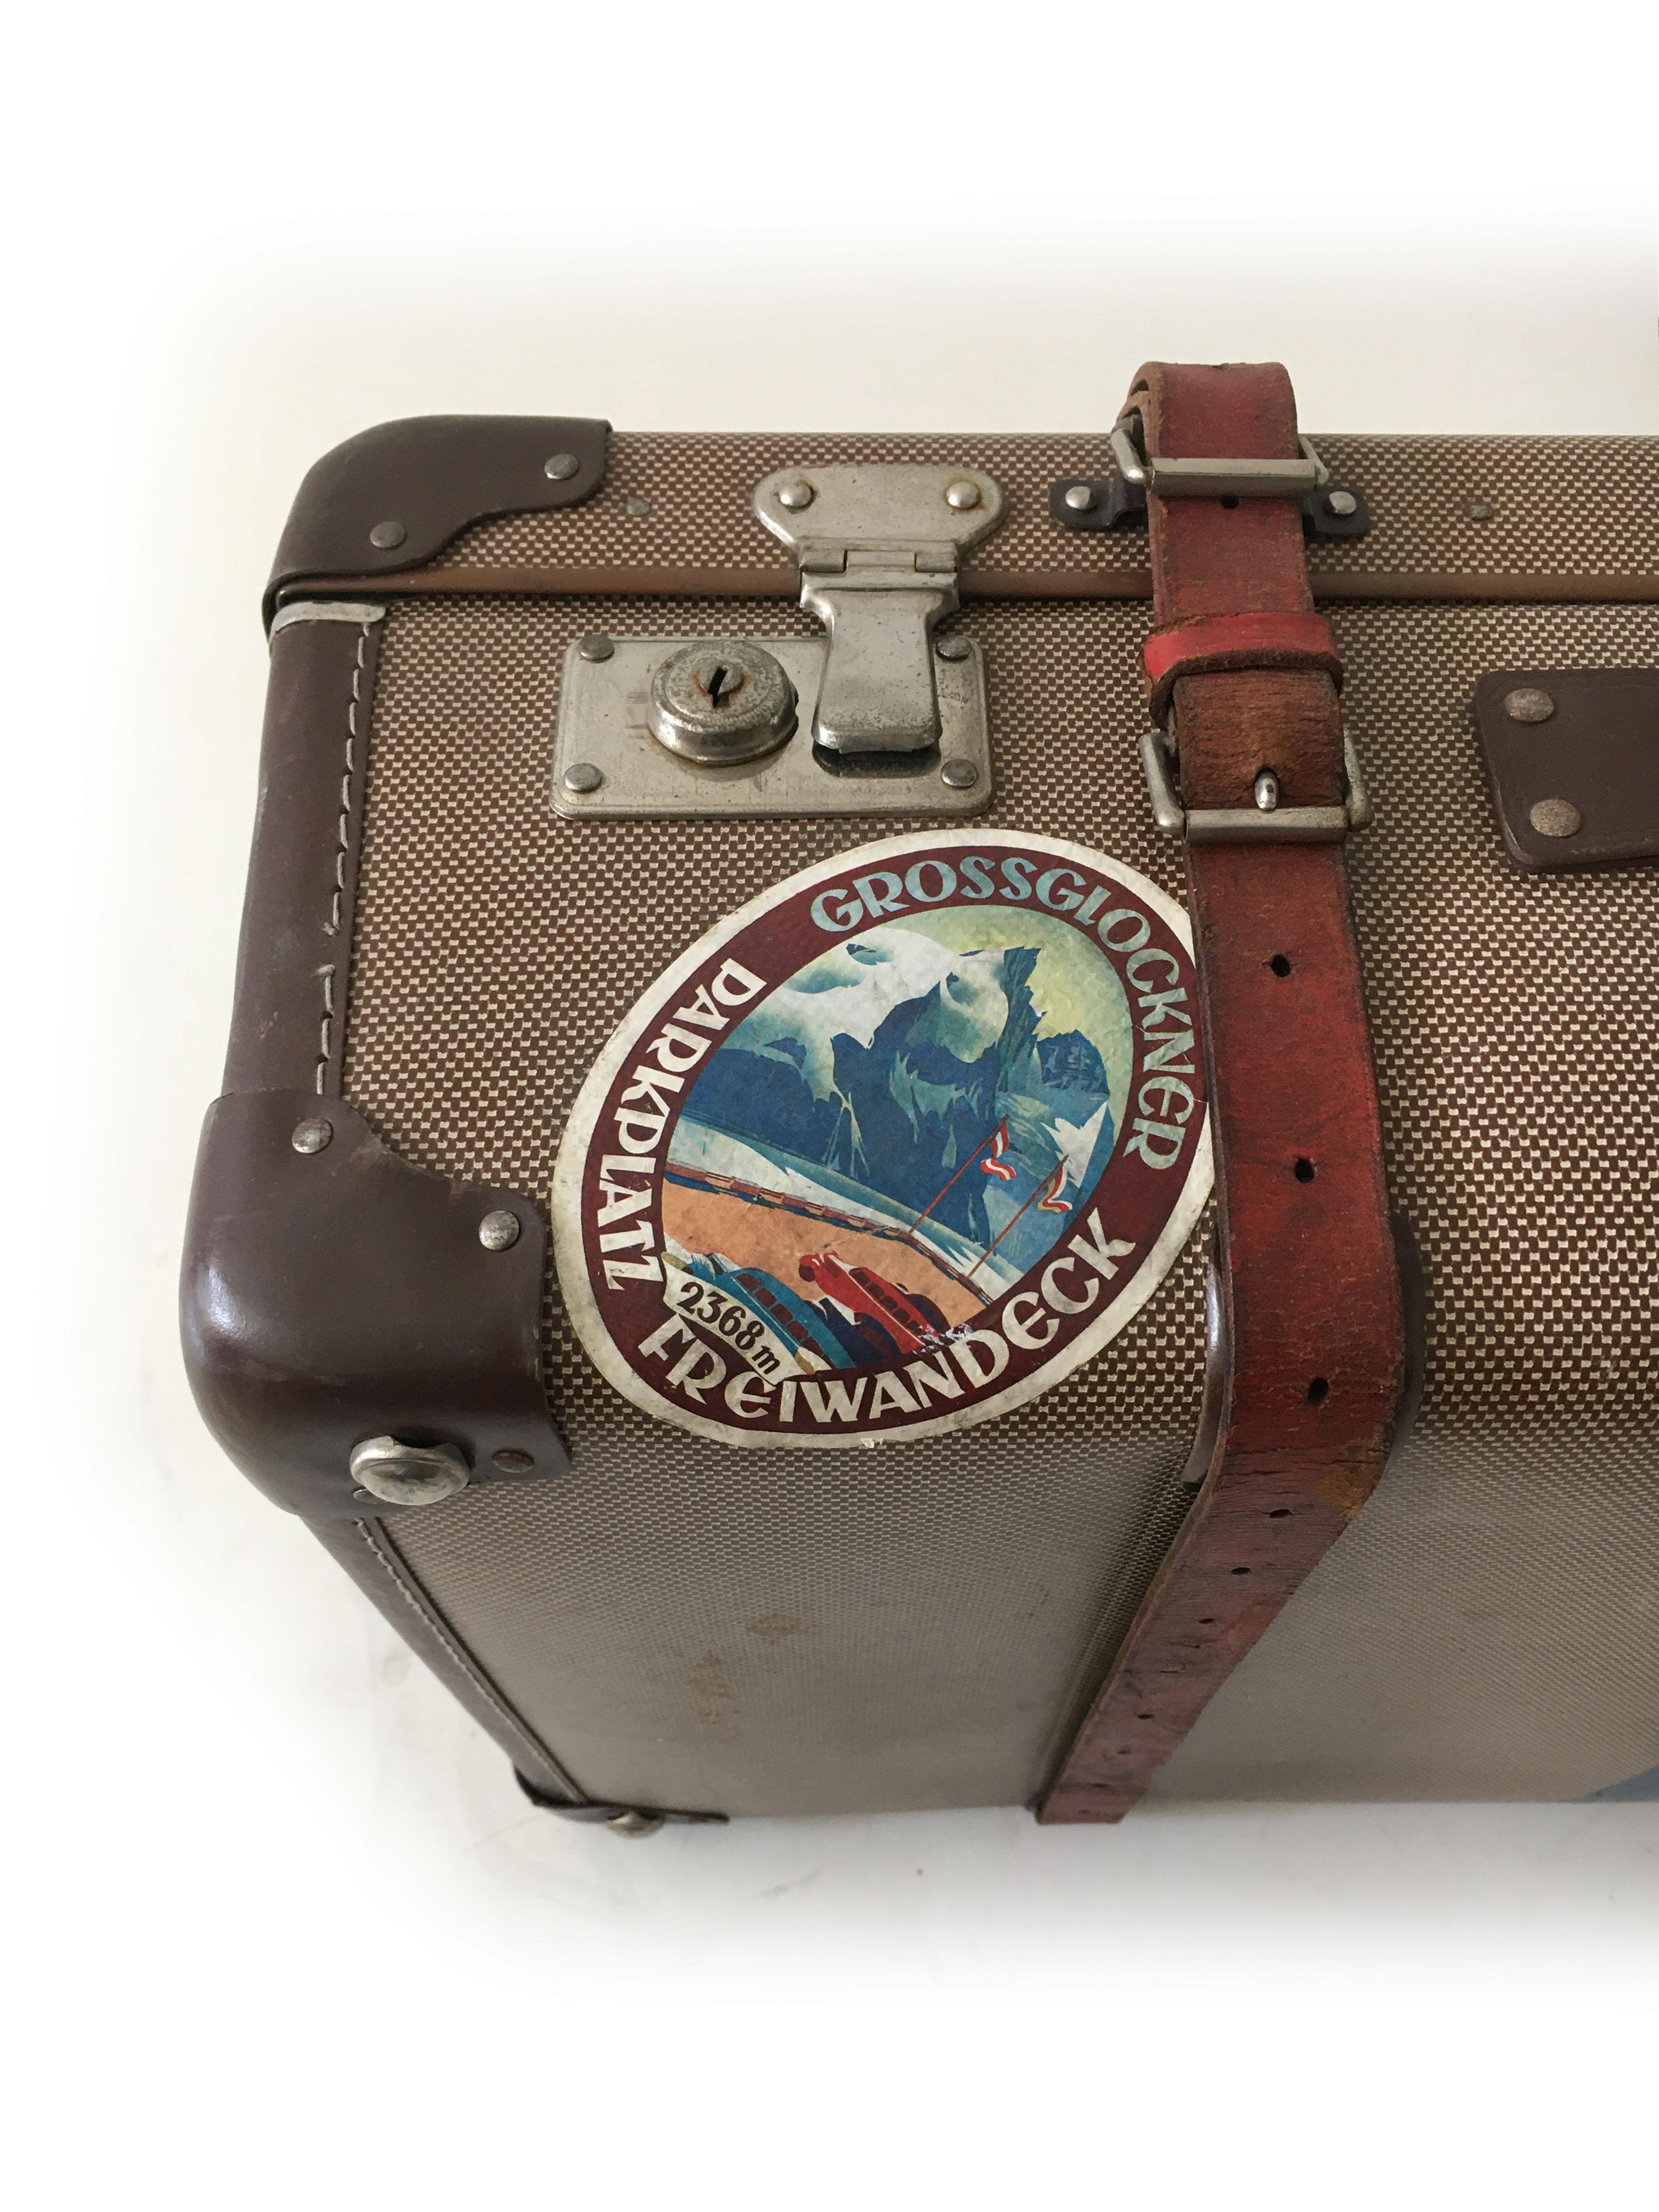 Metal Adler Koffer Luggage with Painted Coat of Arms, Crest of Trieste, Austria 1930s